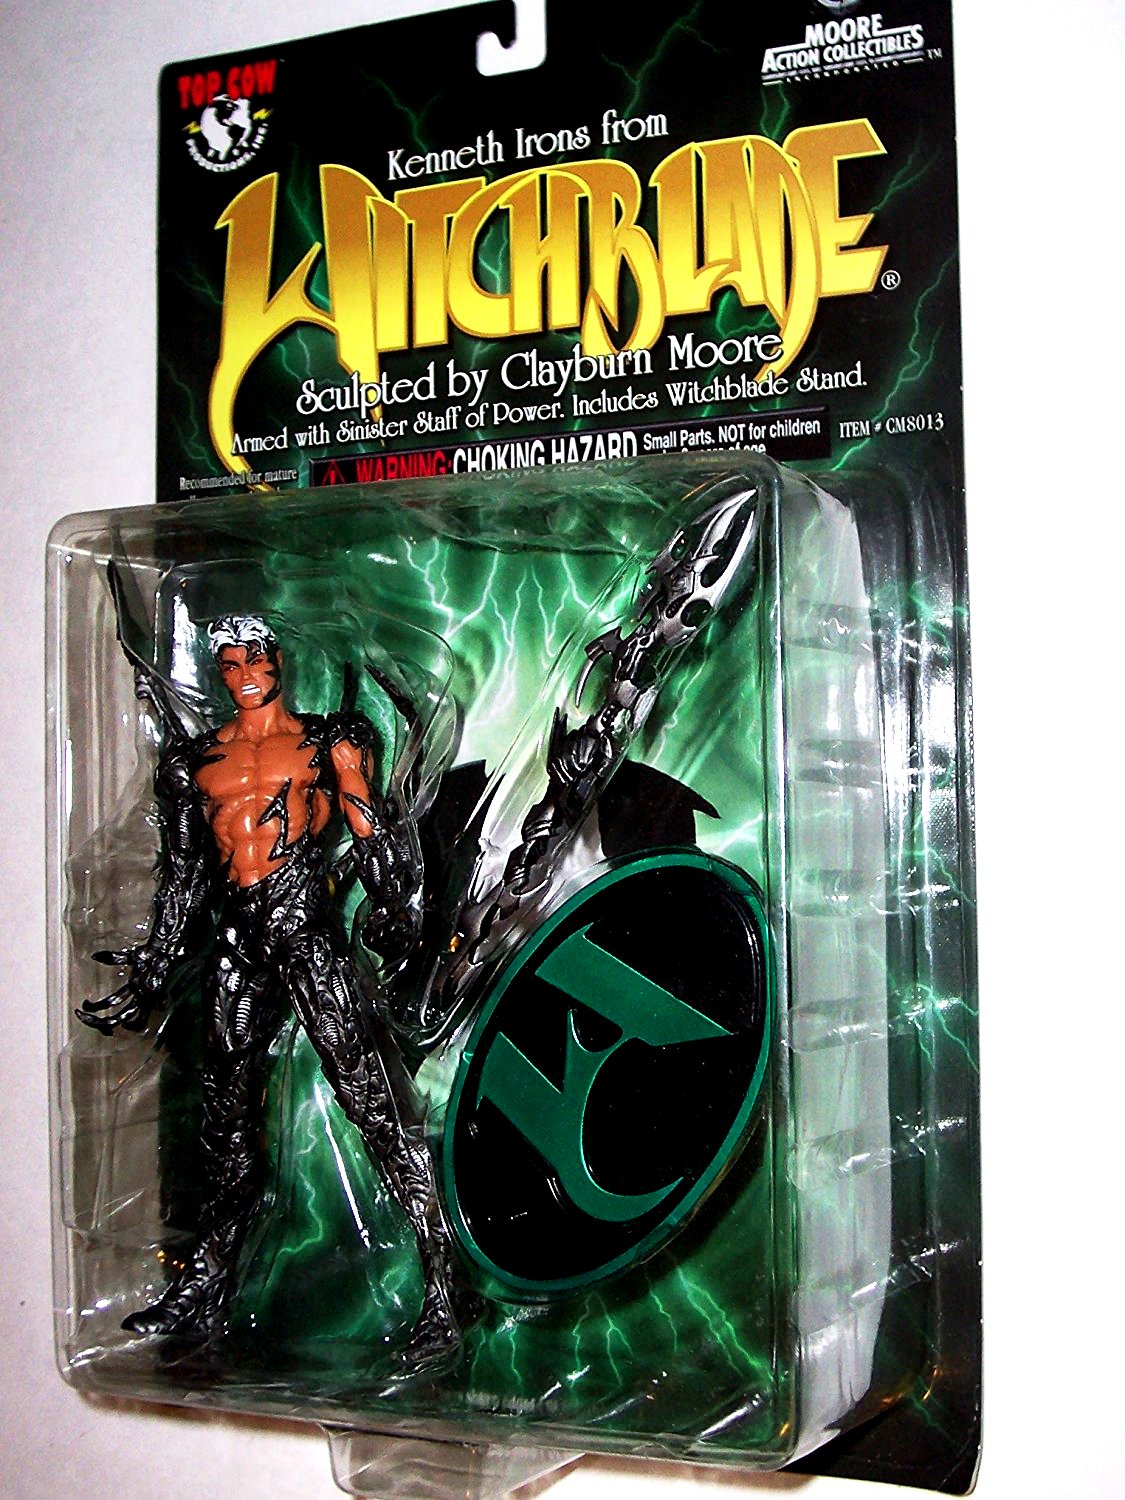 Details about   Kenneth Irons From Witchblade Action Figure Sculpted by Clayburn Moore 